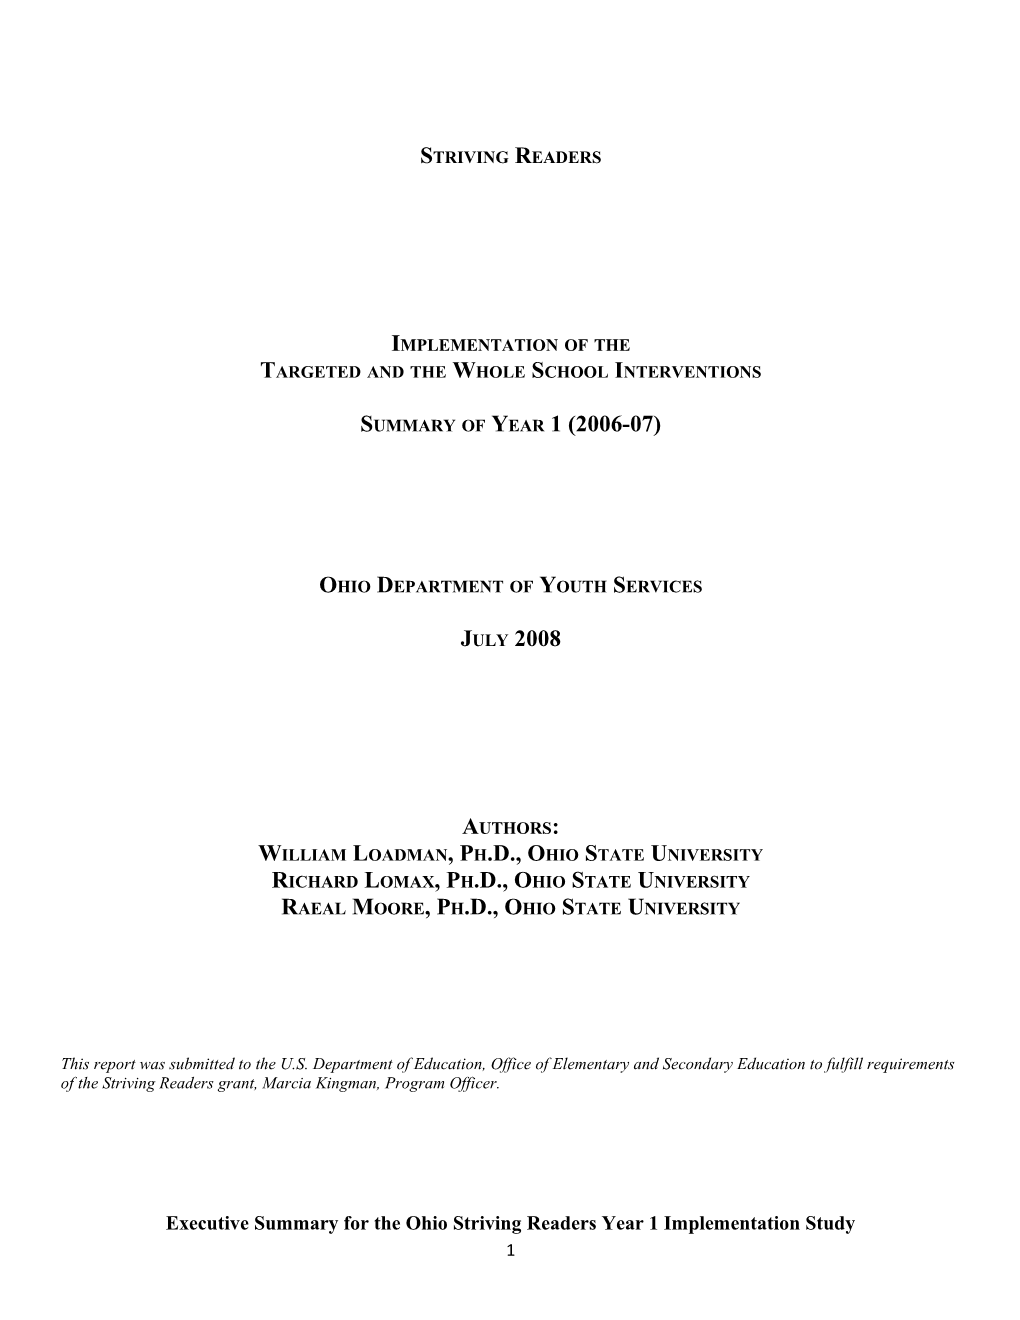 Striving Readers Implementation Study 2006-2007: Ohio Department of Youth Services (MS Word)